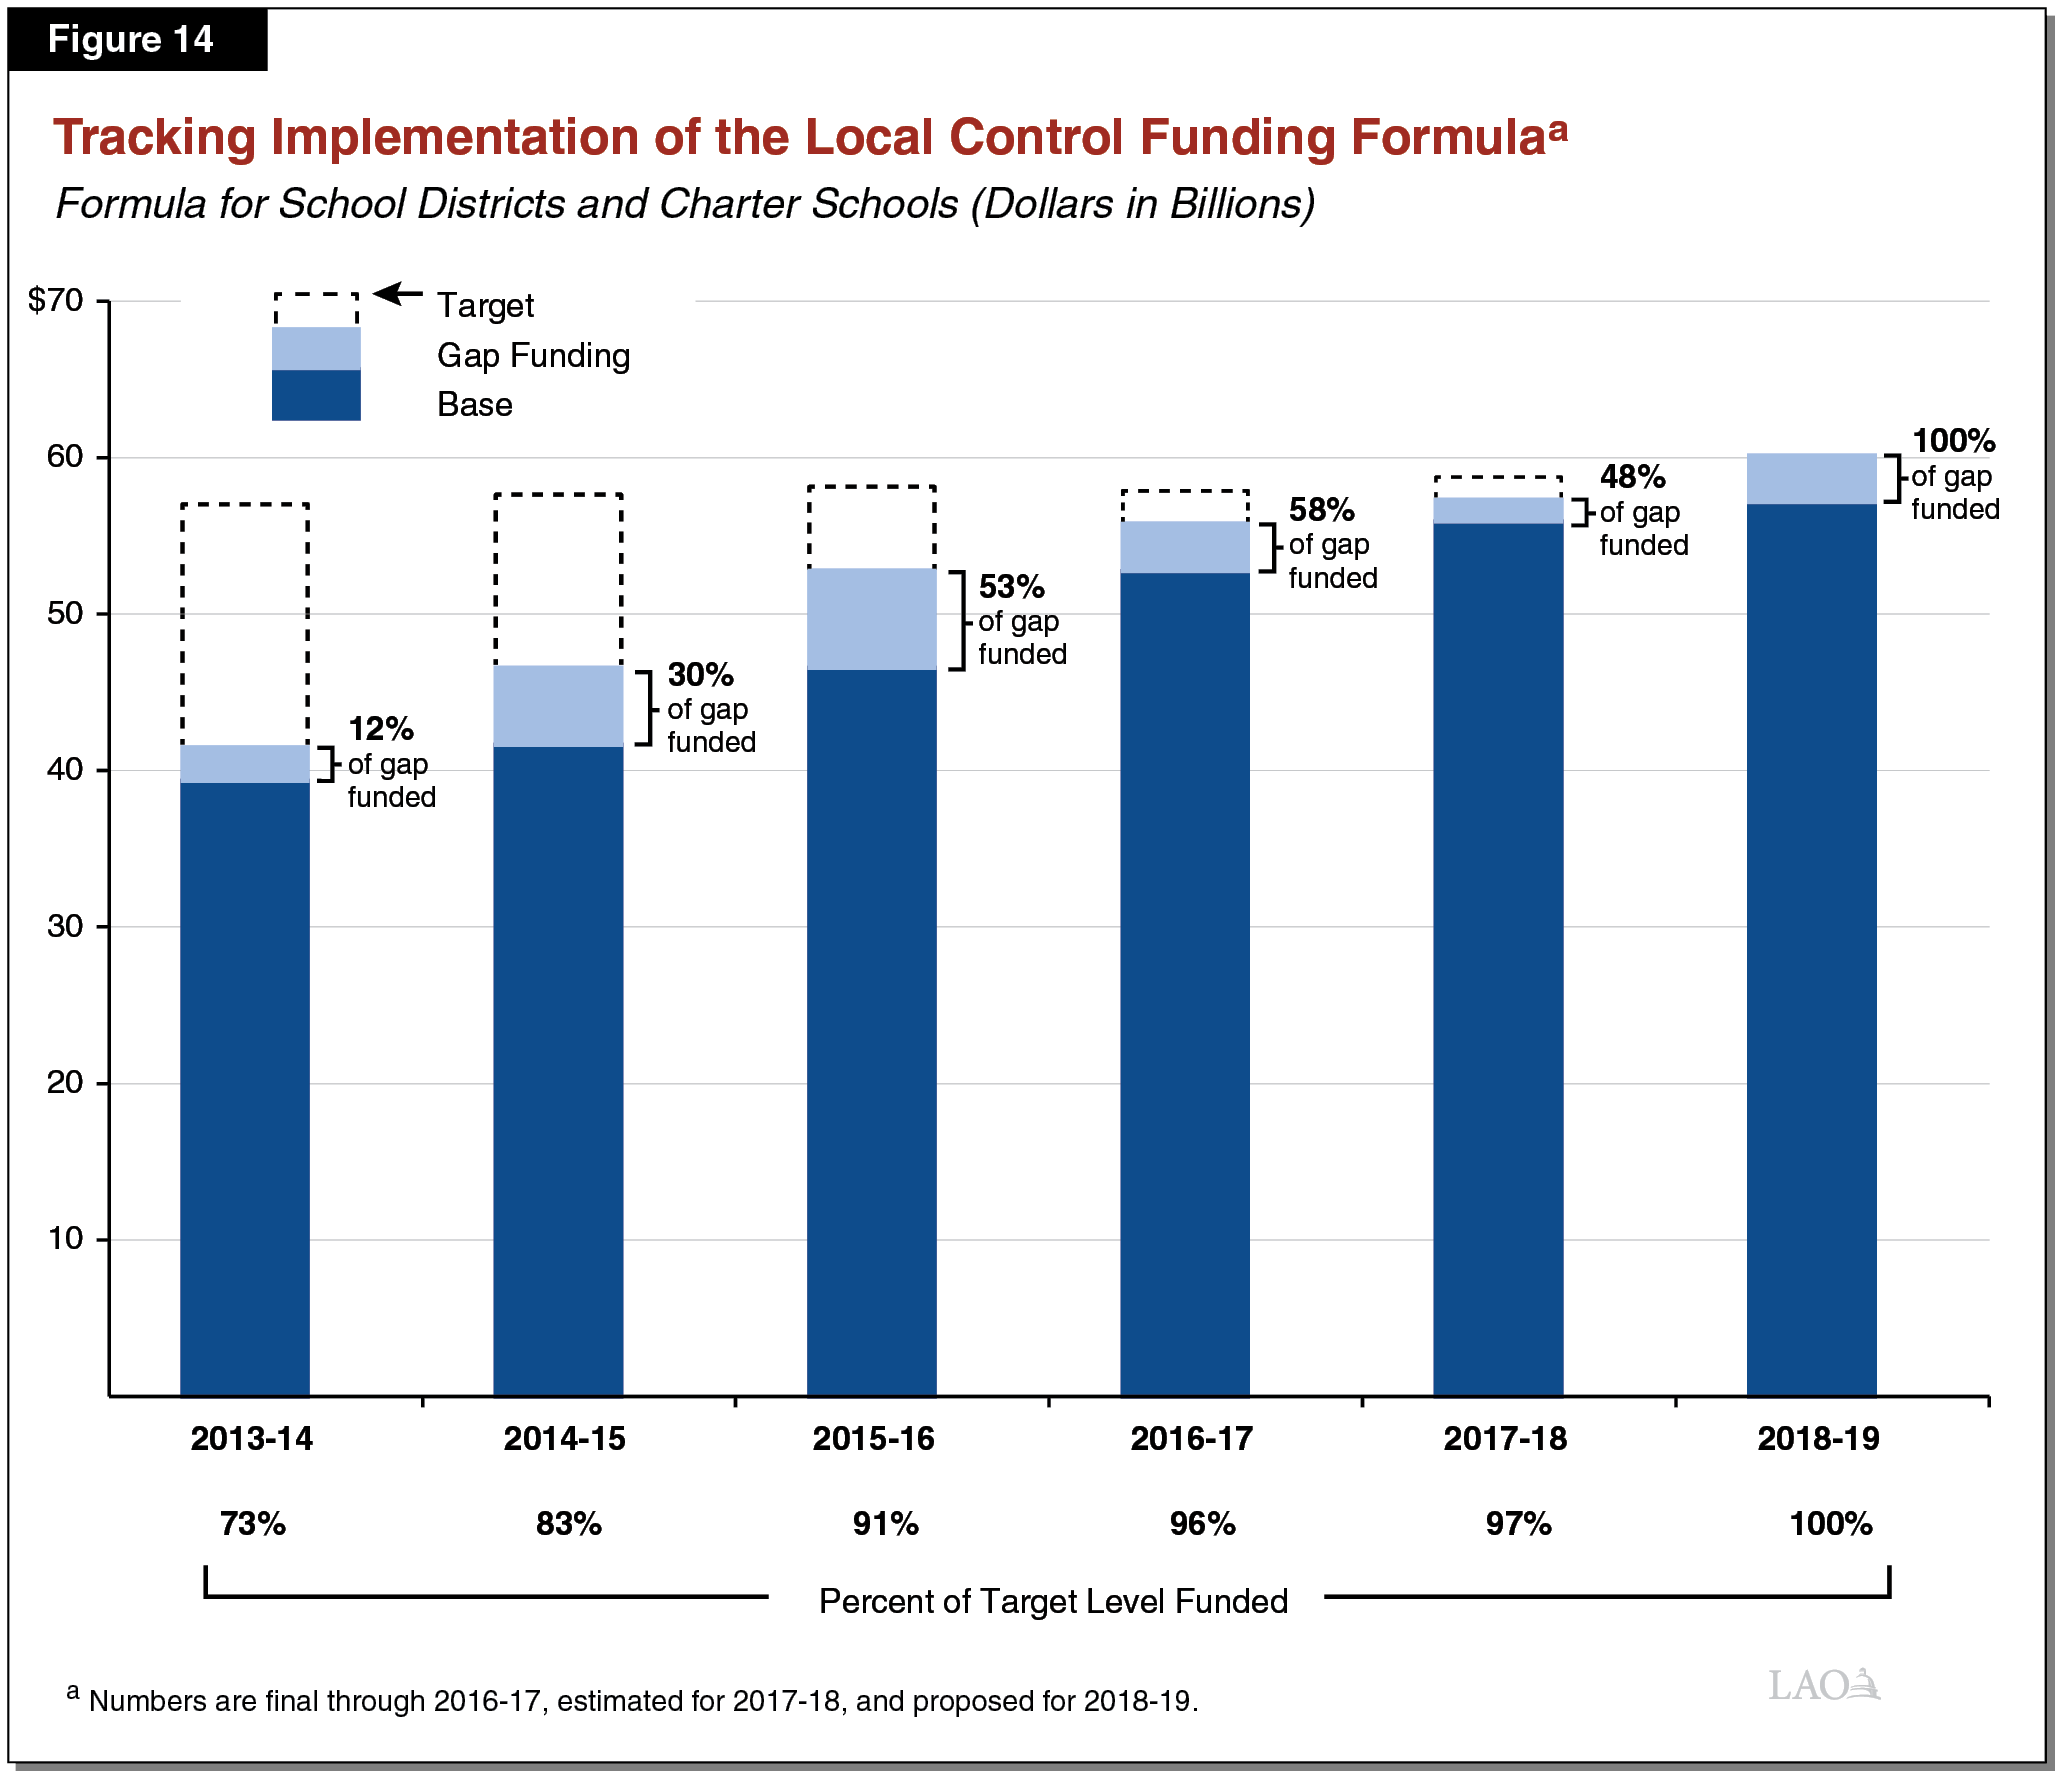 Figure 14 - Tracking Implementation of the Local Control Funding Formula